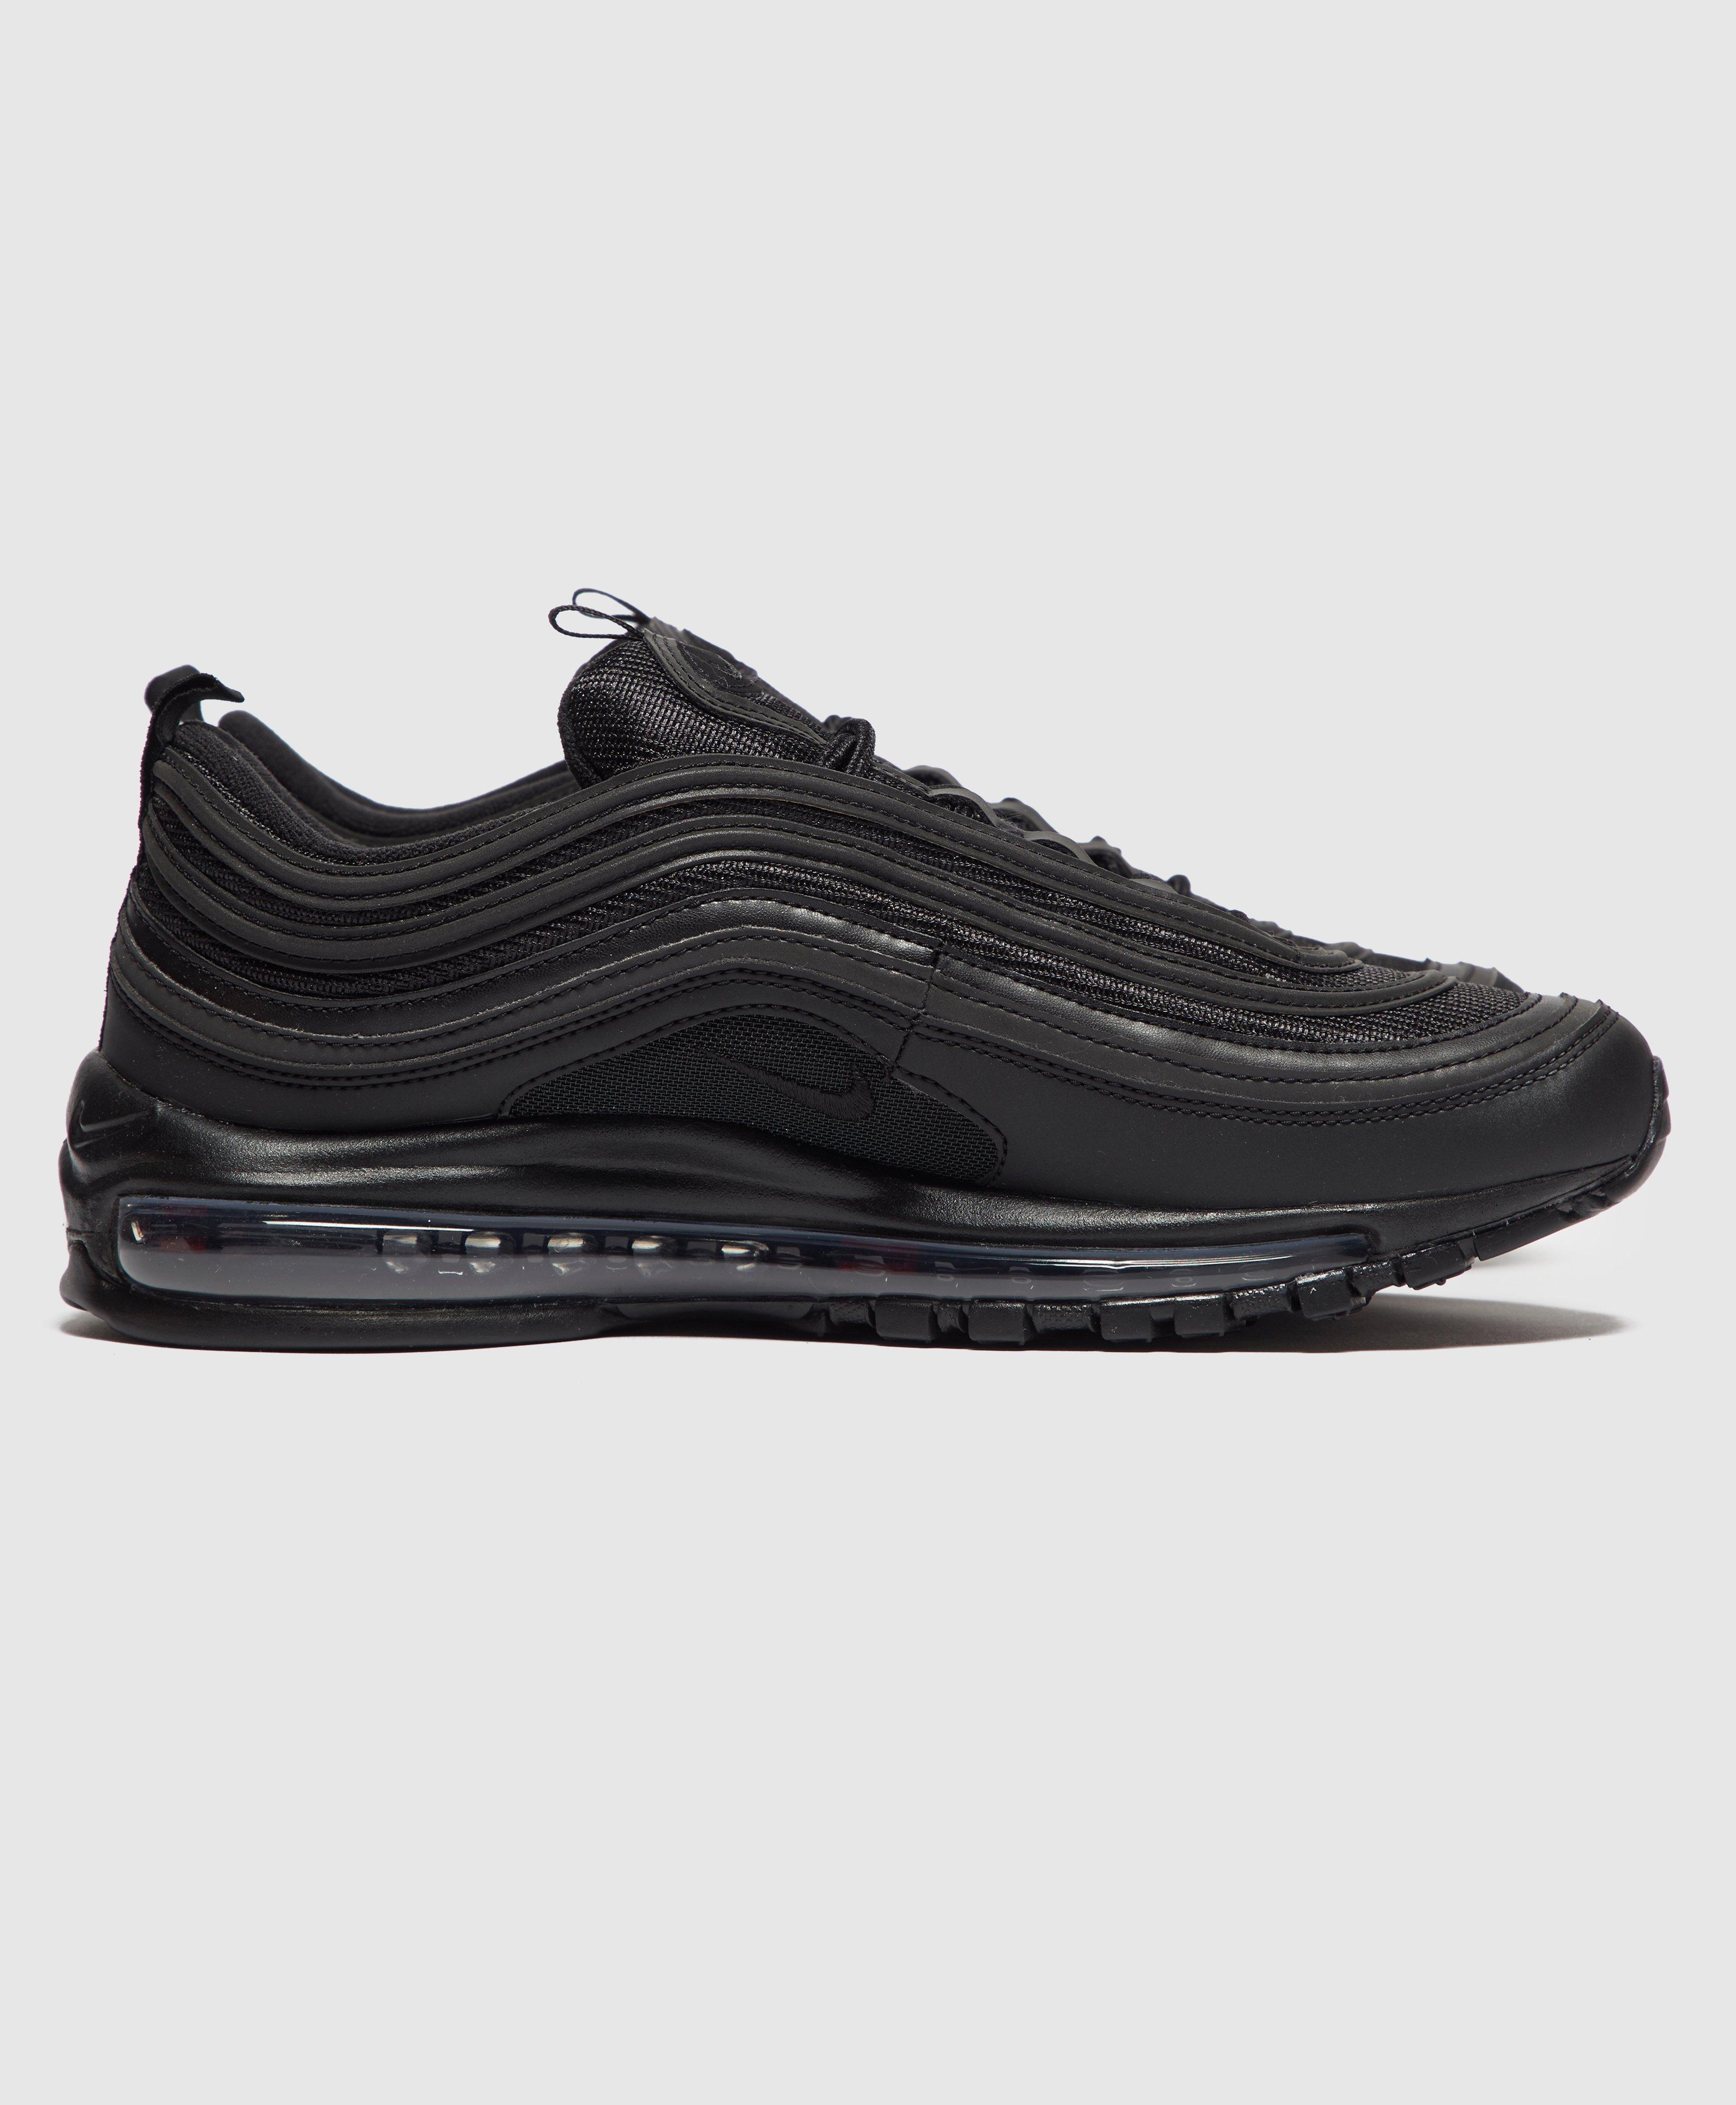 Nike Leather Air Max 97 Essential in Black for Men - Lyst